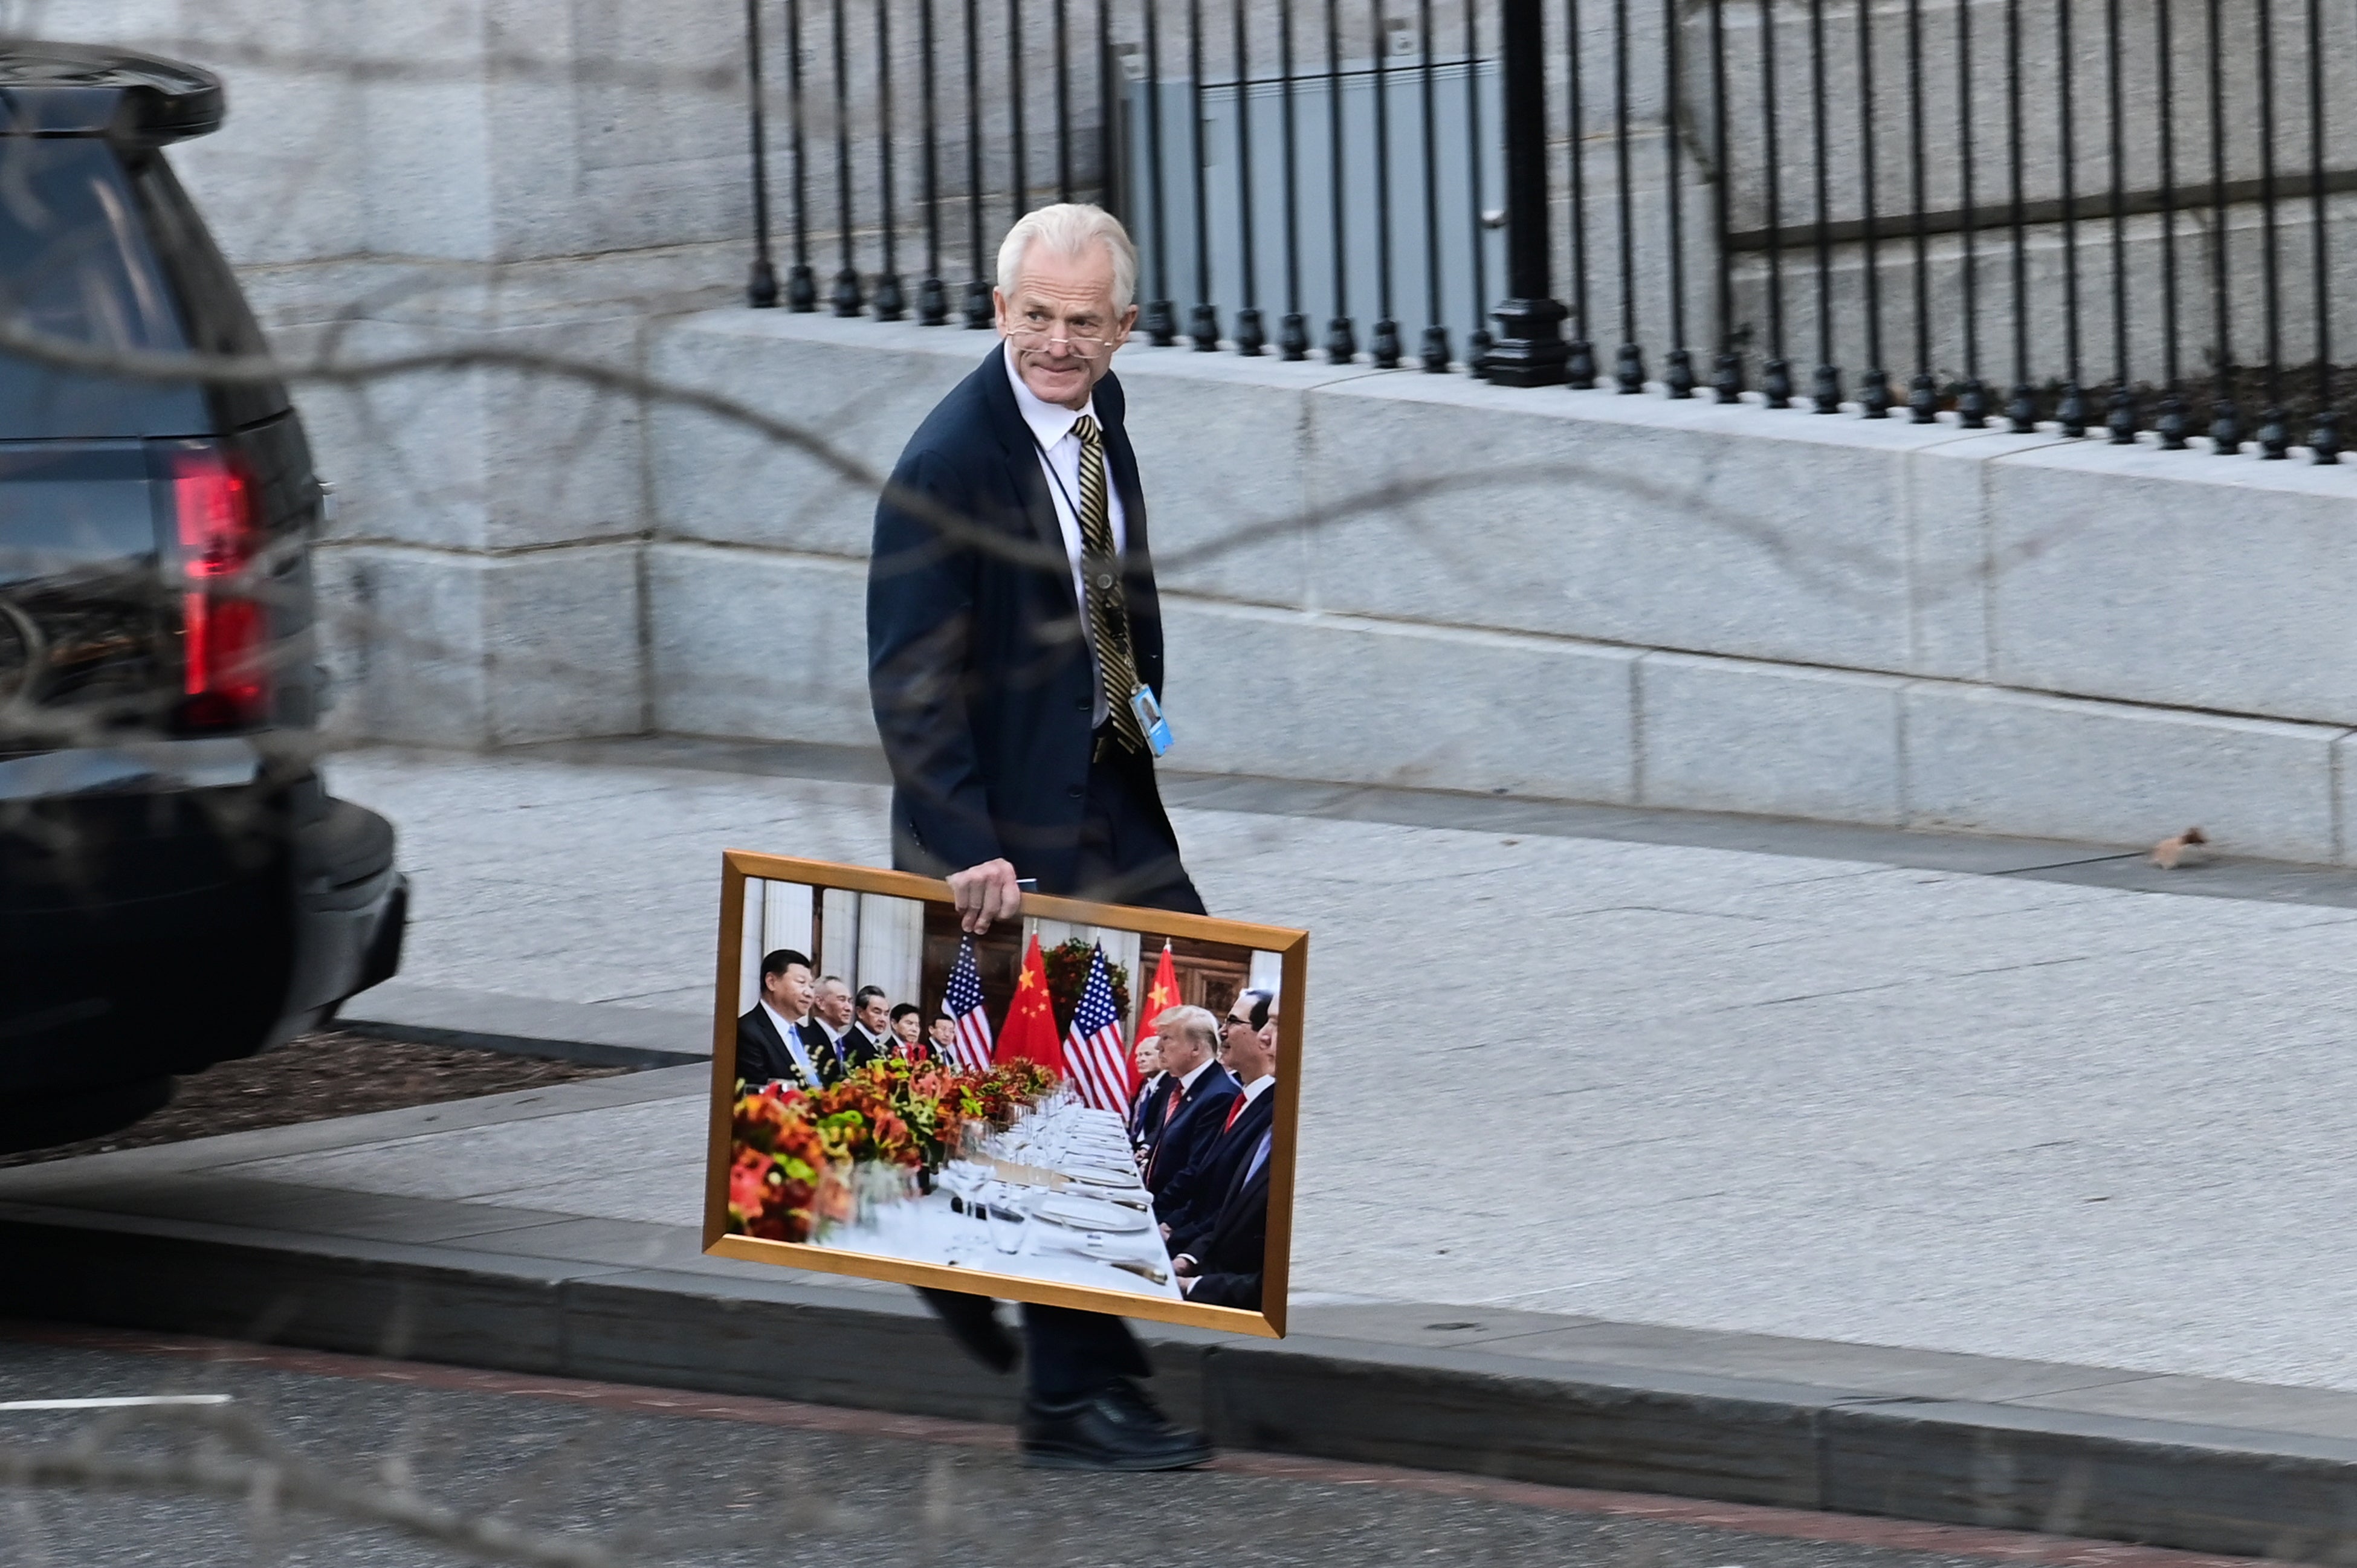 White House adviser Peter Navarro leaves the West Wing with a photograph of U.S. President Trump and Chinese President Xi in Washington